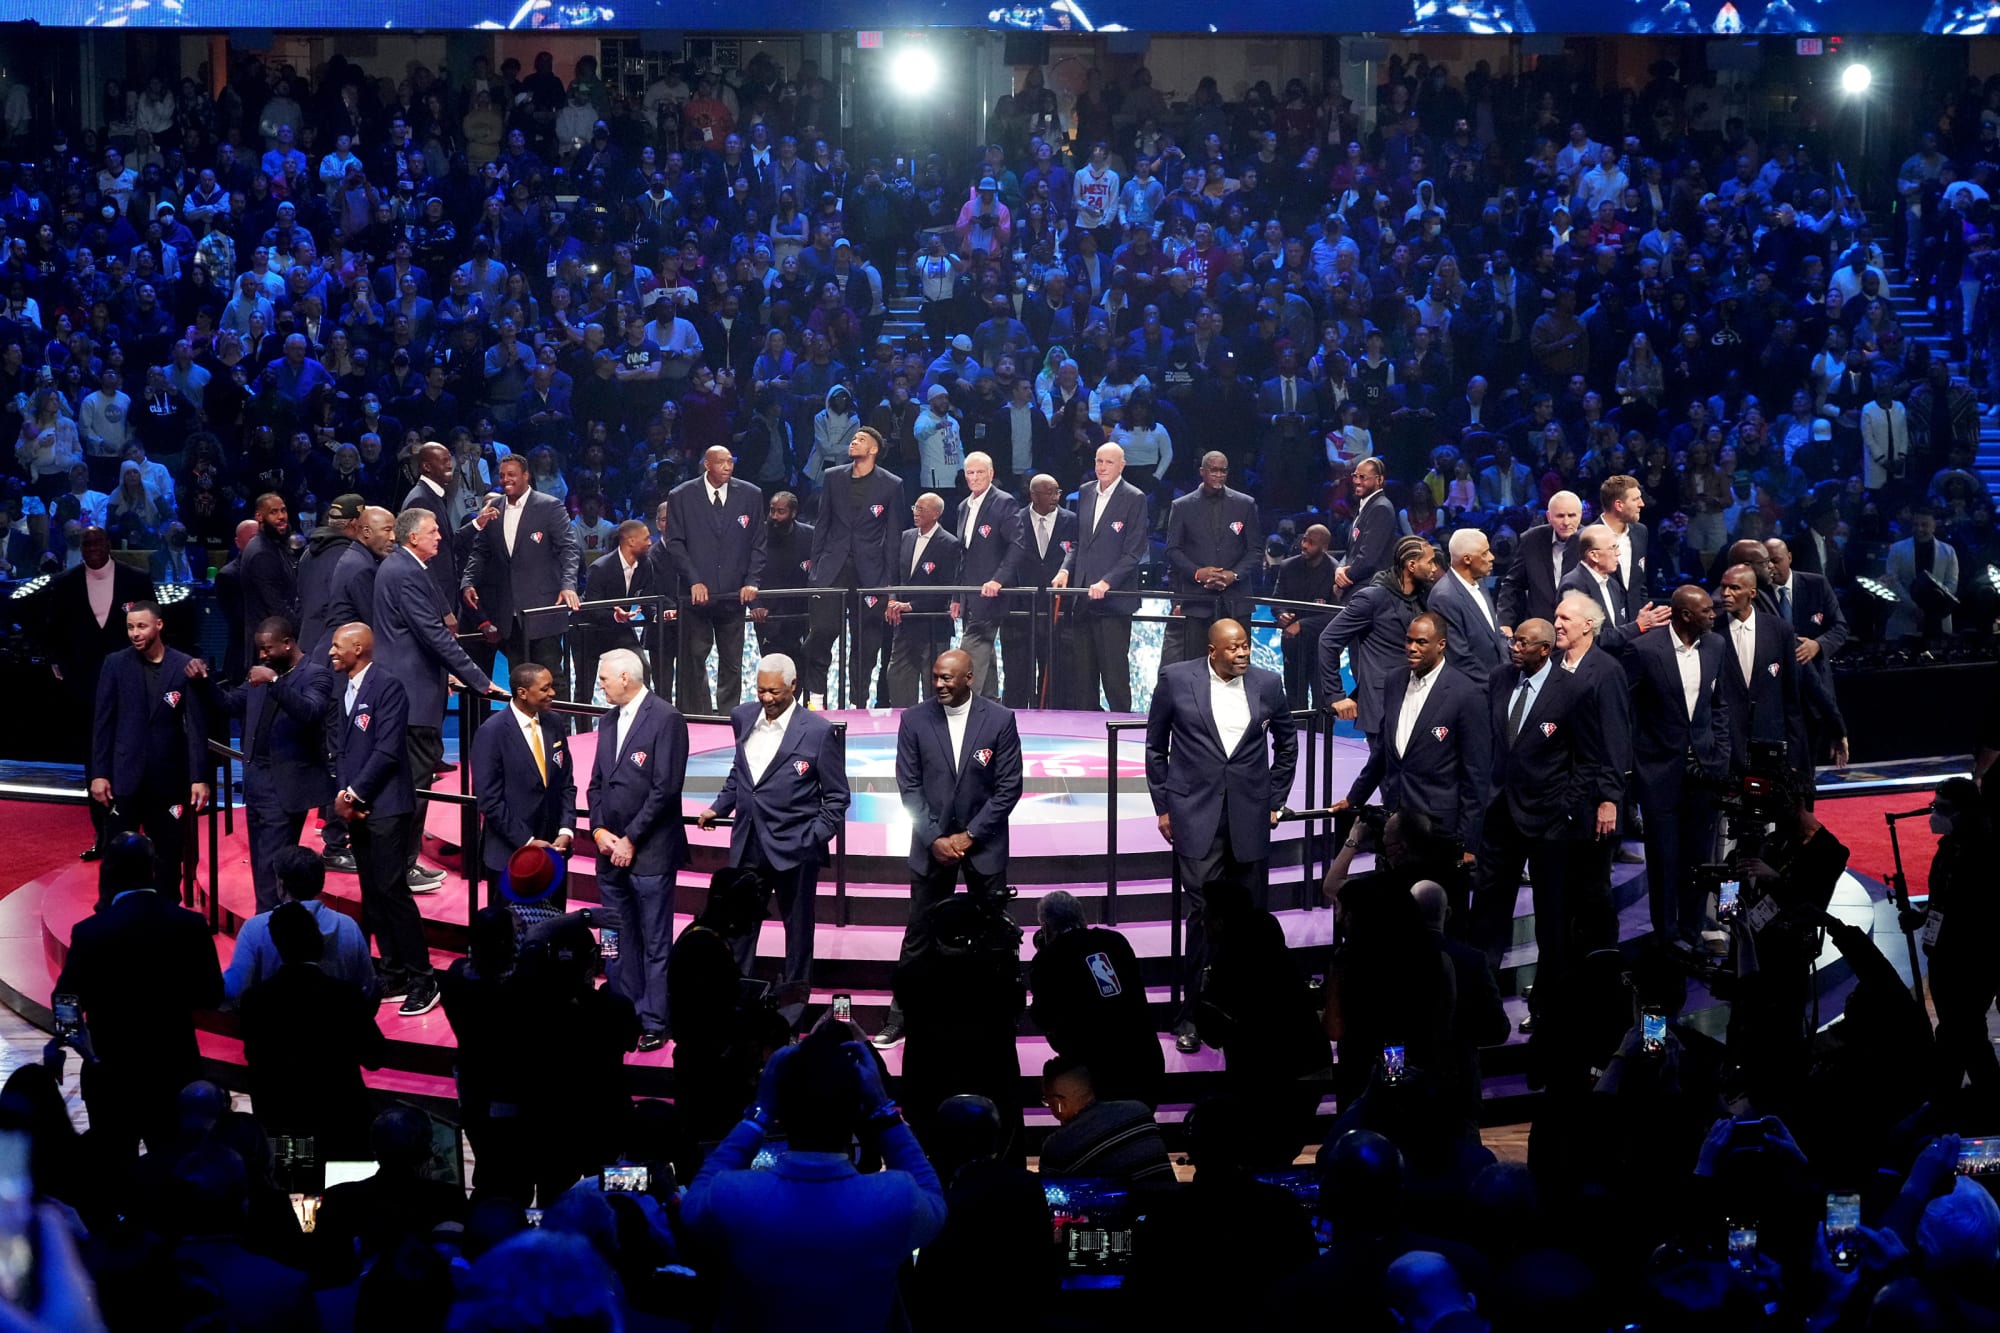 Sights and sounds from the NBA 75th Anniversary team presentation